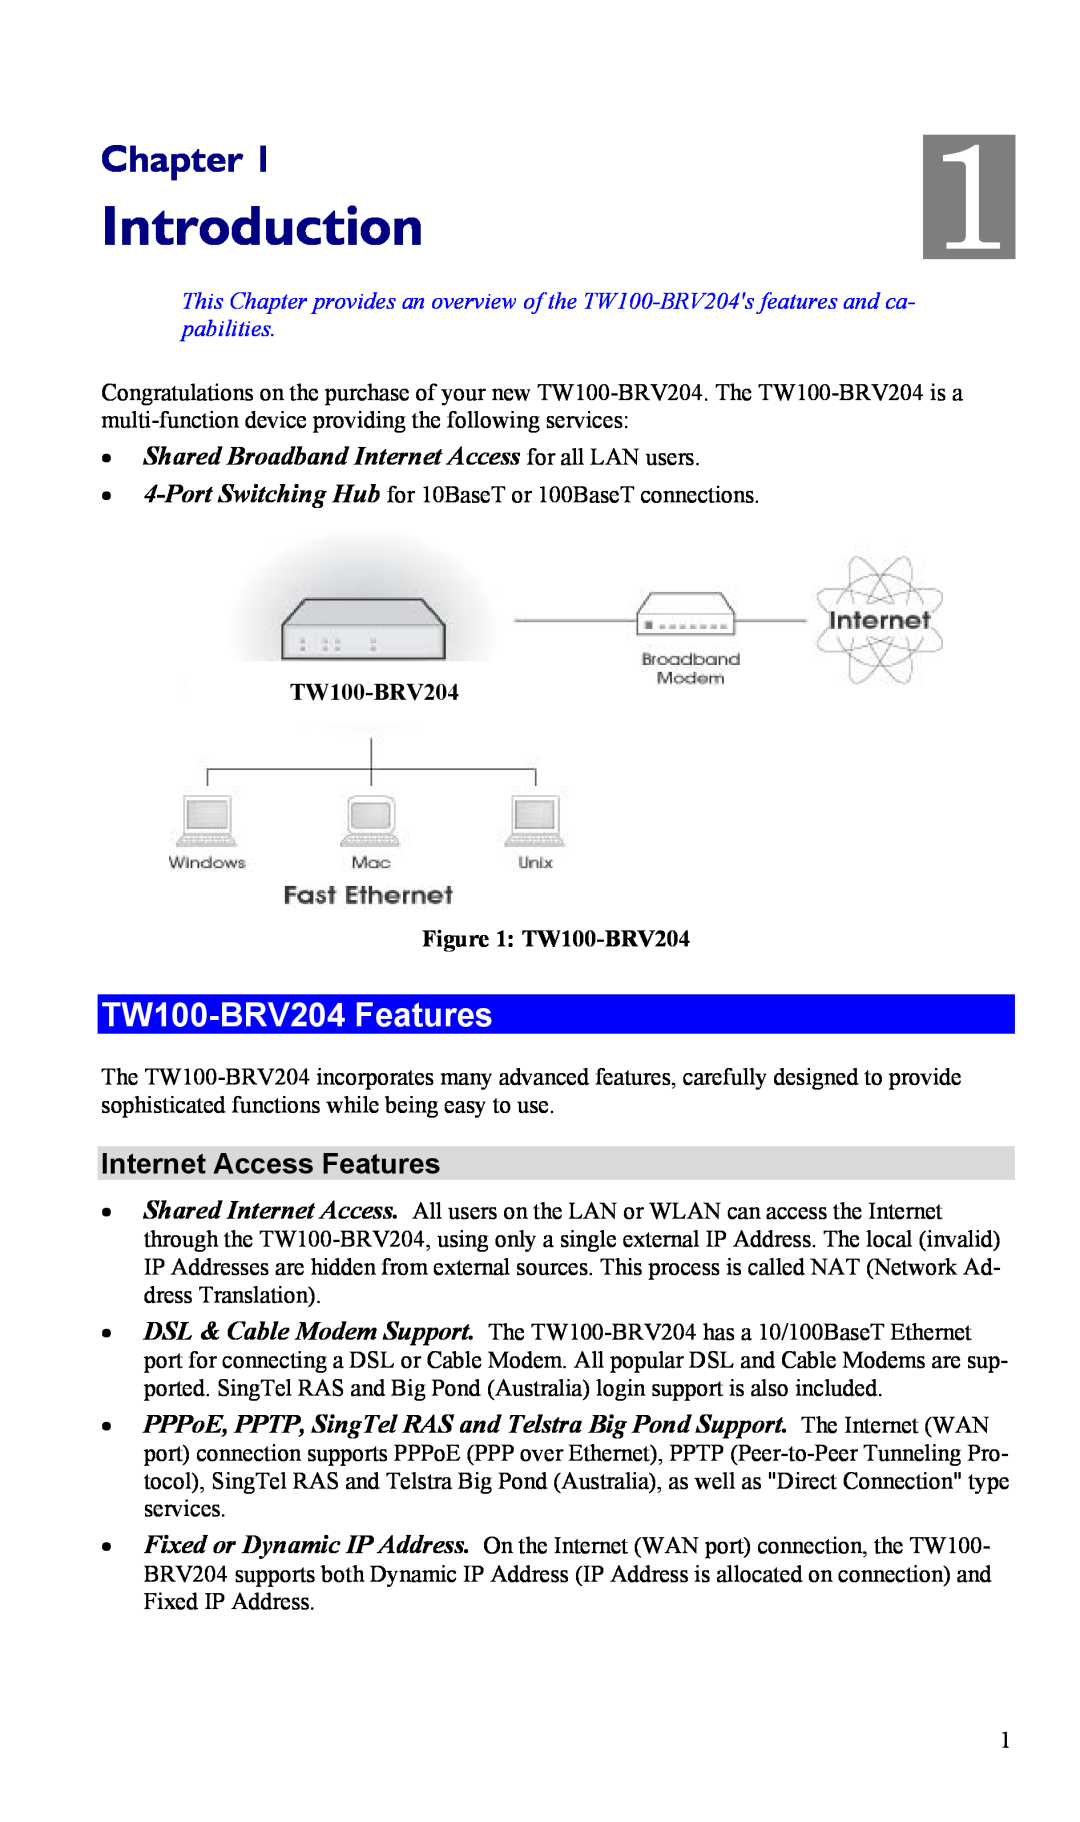 TRENDnet VPN Firewall Router manual Introduction, Chapter, TW100-BRV204 Features, Internet Access Features 